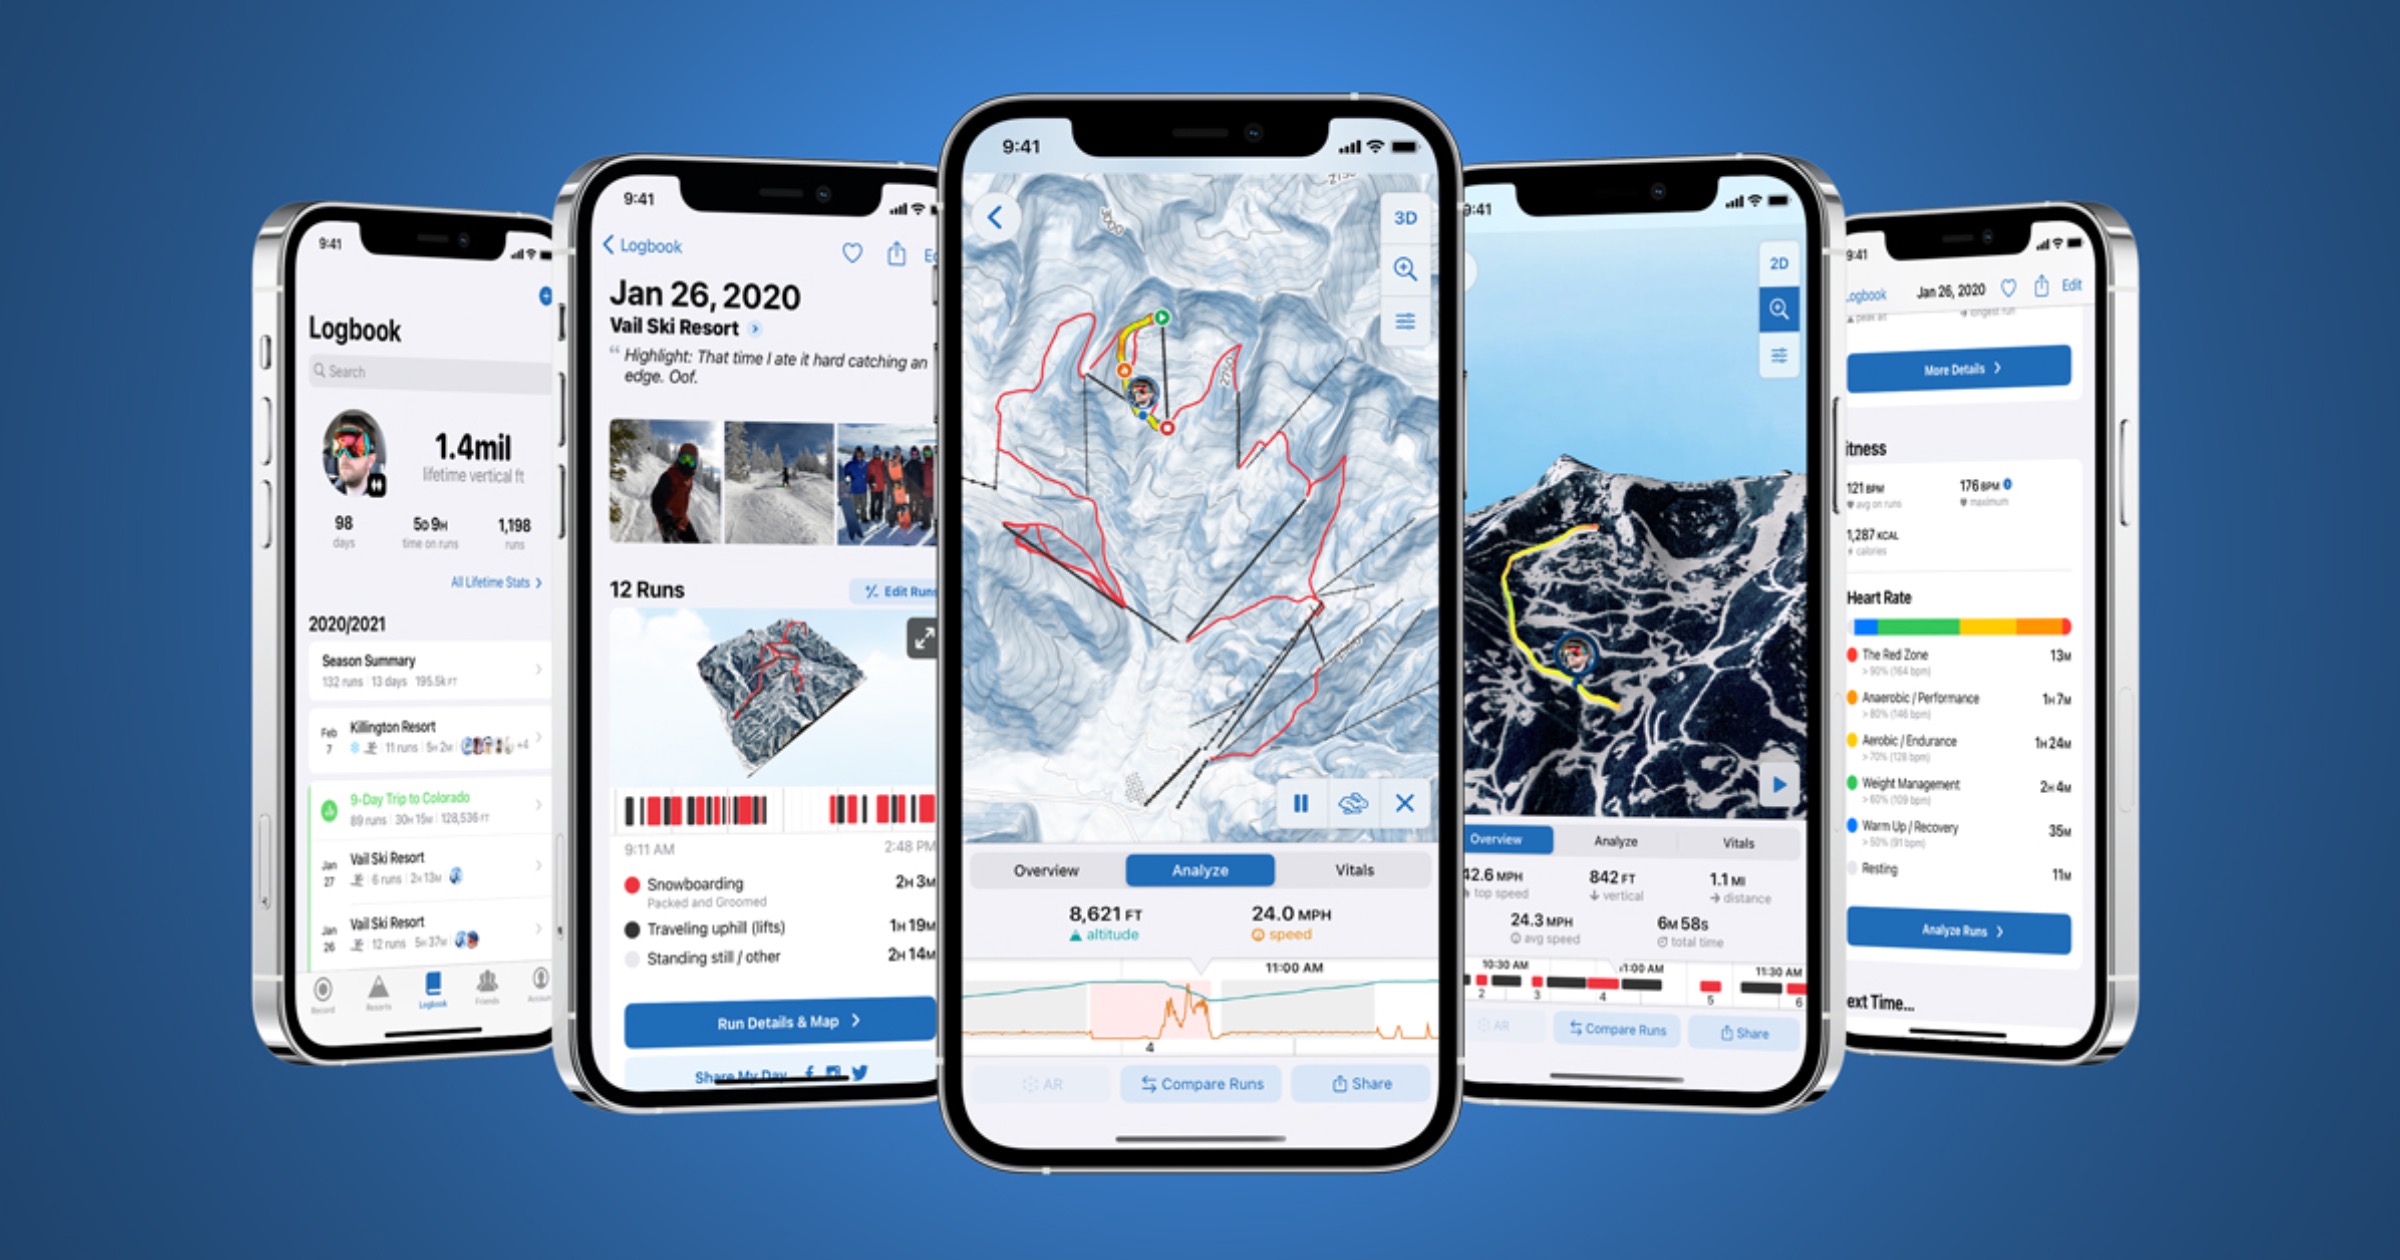 iPhone 12 models running the Slopes app.